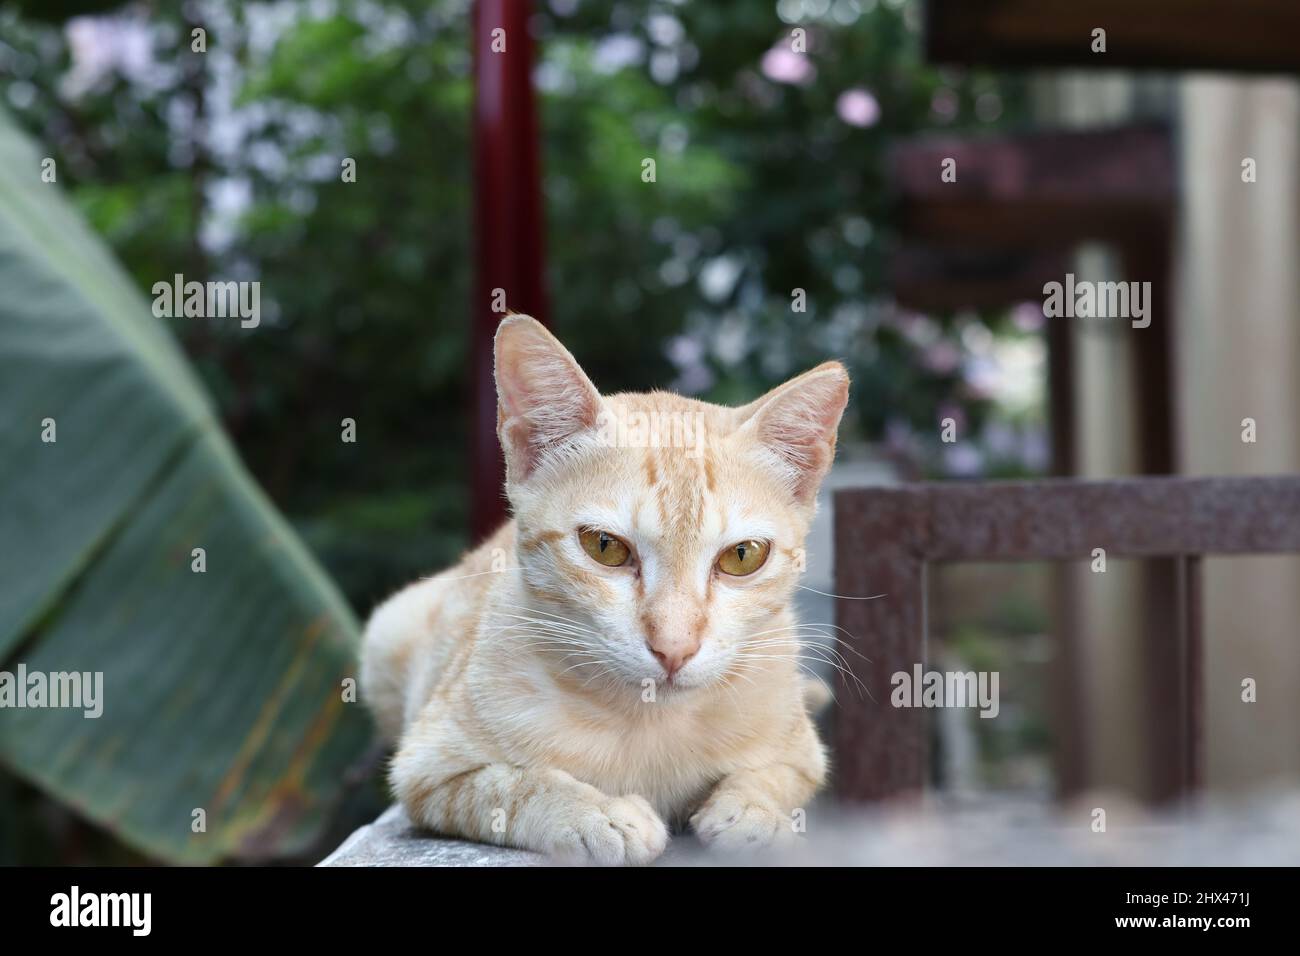 A Brown Pet Cat Sitting on the Wall Looking Keen to the Camera Stock Photo